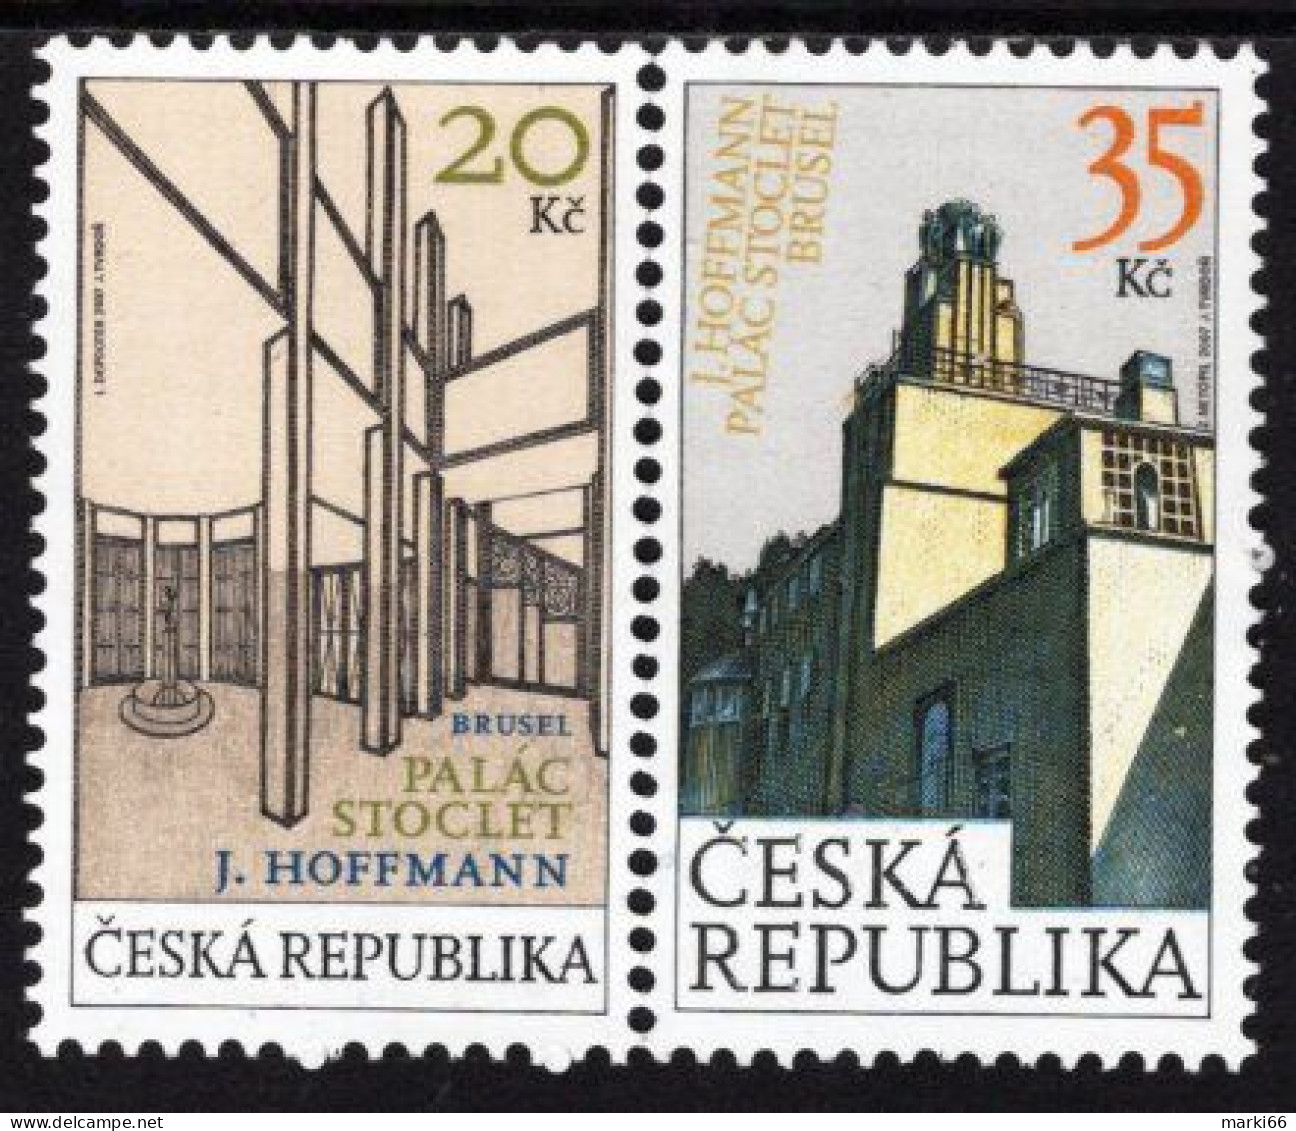 Czech Republic - 2007 - Architecture - Stoclet Palace - Joint Issue With Belgium - Mint Stamp Set - Unused Stamps